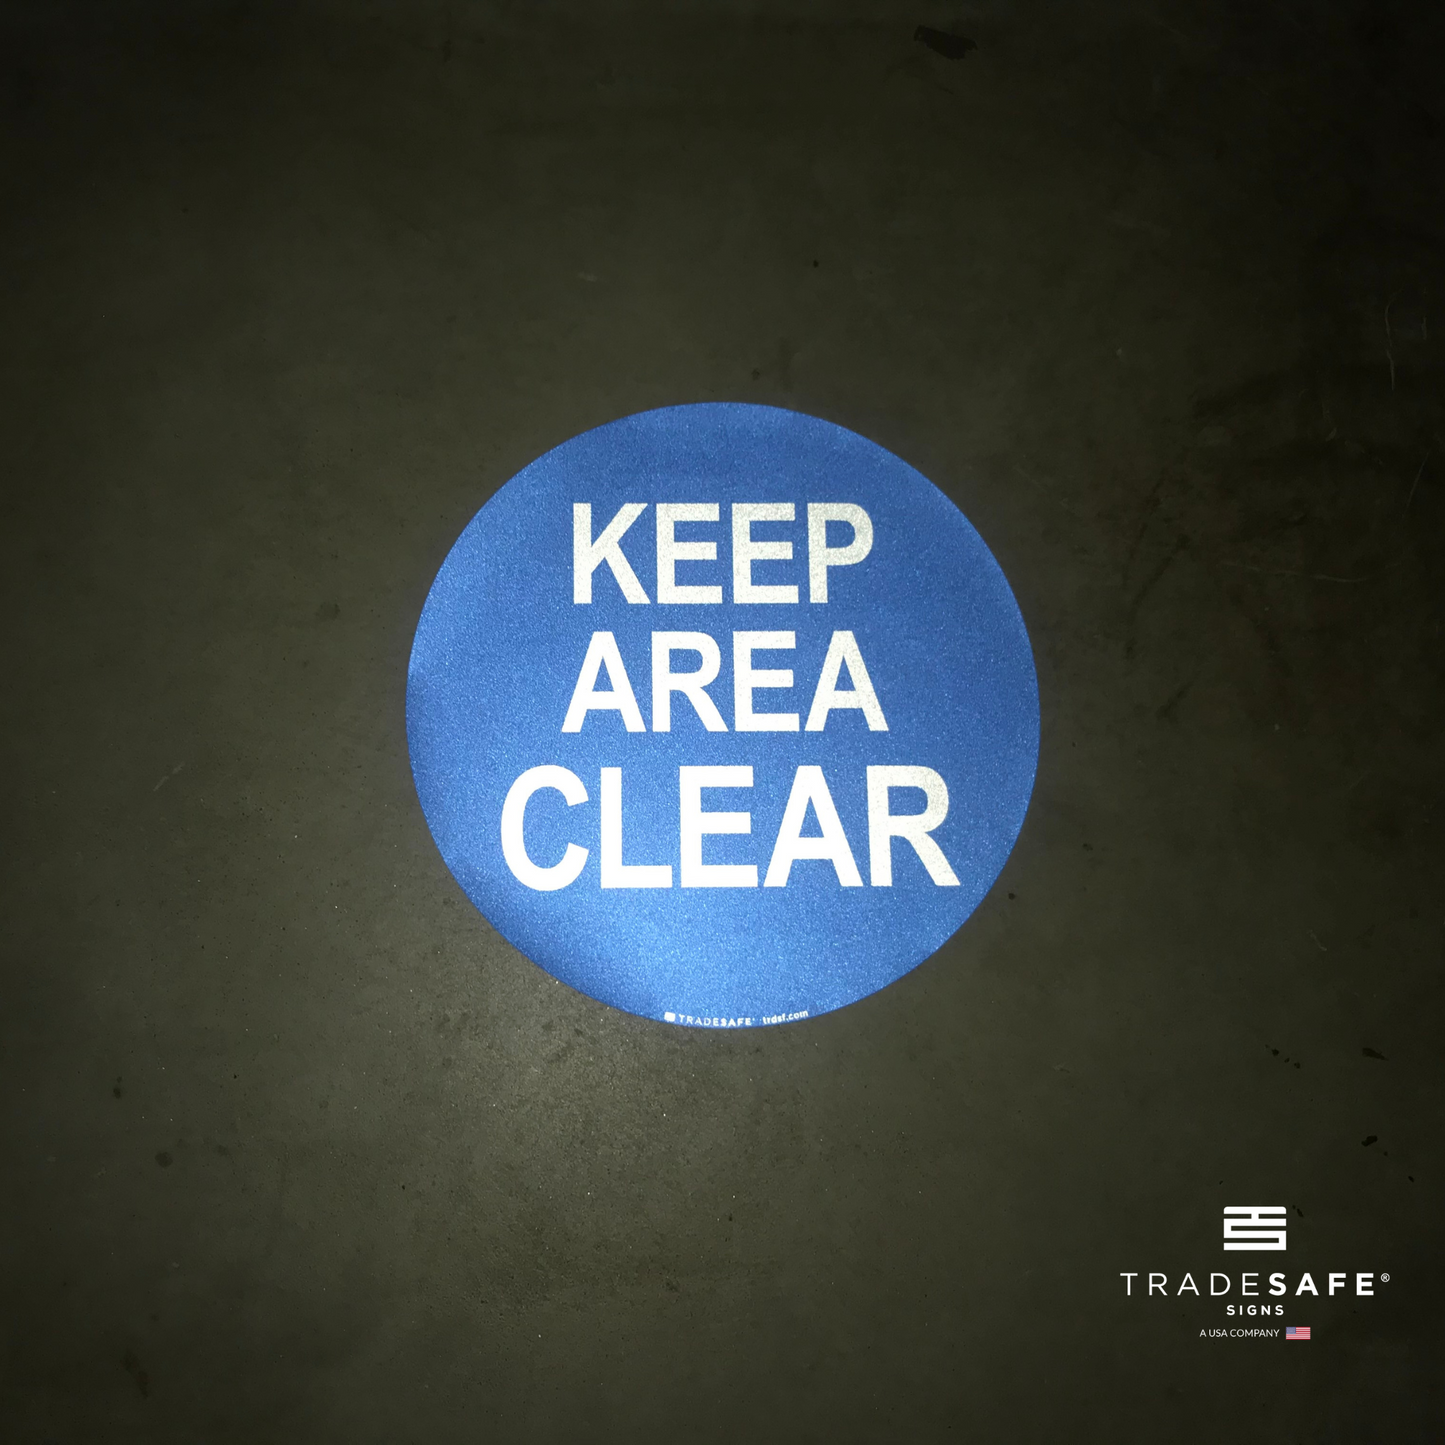 reflective attribute of keep area clear sign on black background